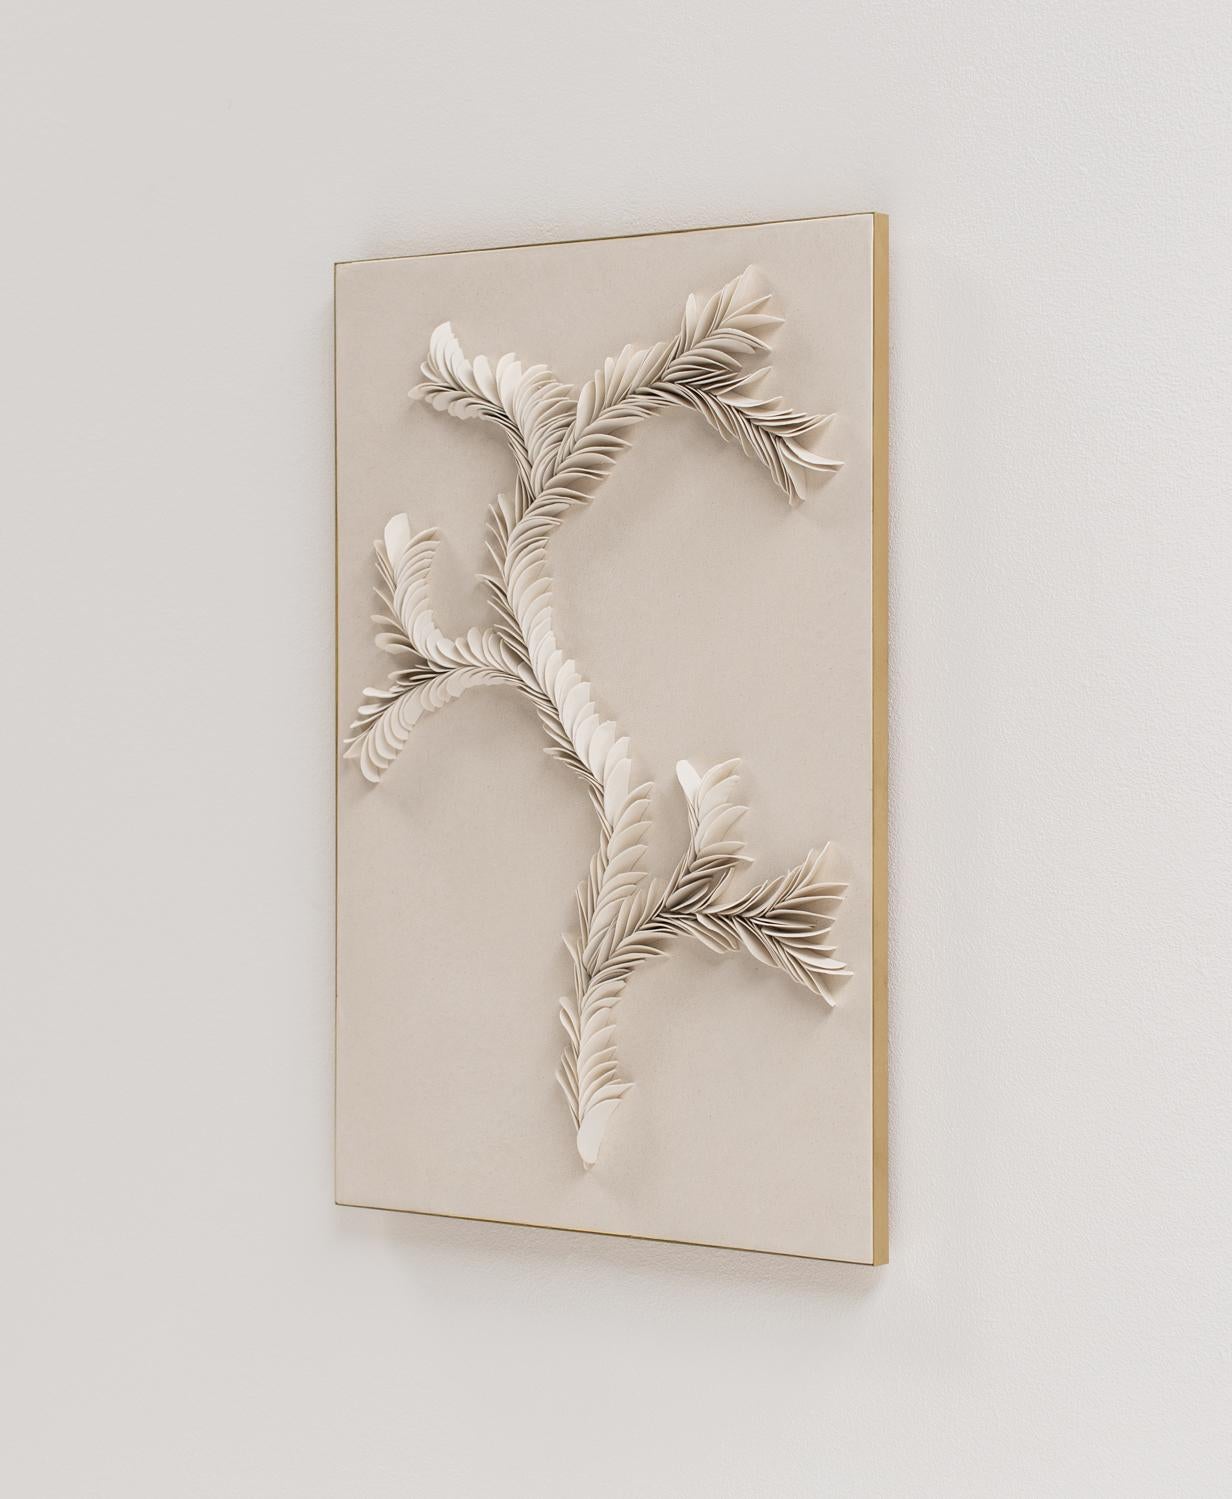 English Branching porcelain wall art in sand (medium) by Olivia Walker For Sale